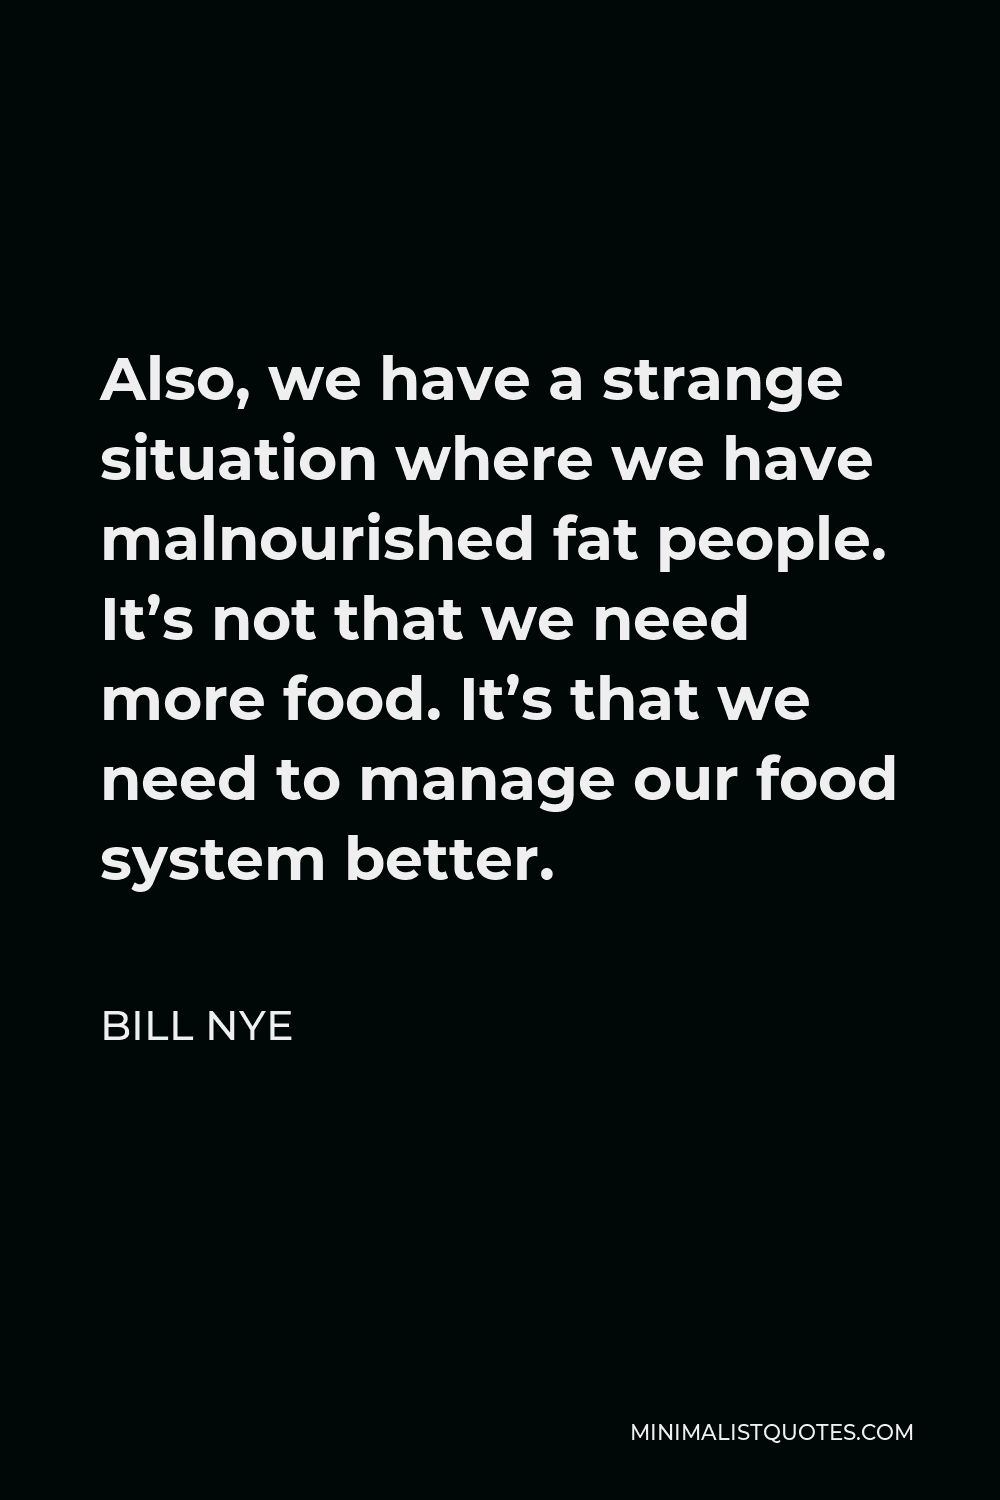 Bill Nye Quote - Also, we have a strange situation where we have malnourished fat people. It’s not that we need more food. It’s that we need to manage our food system better.